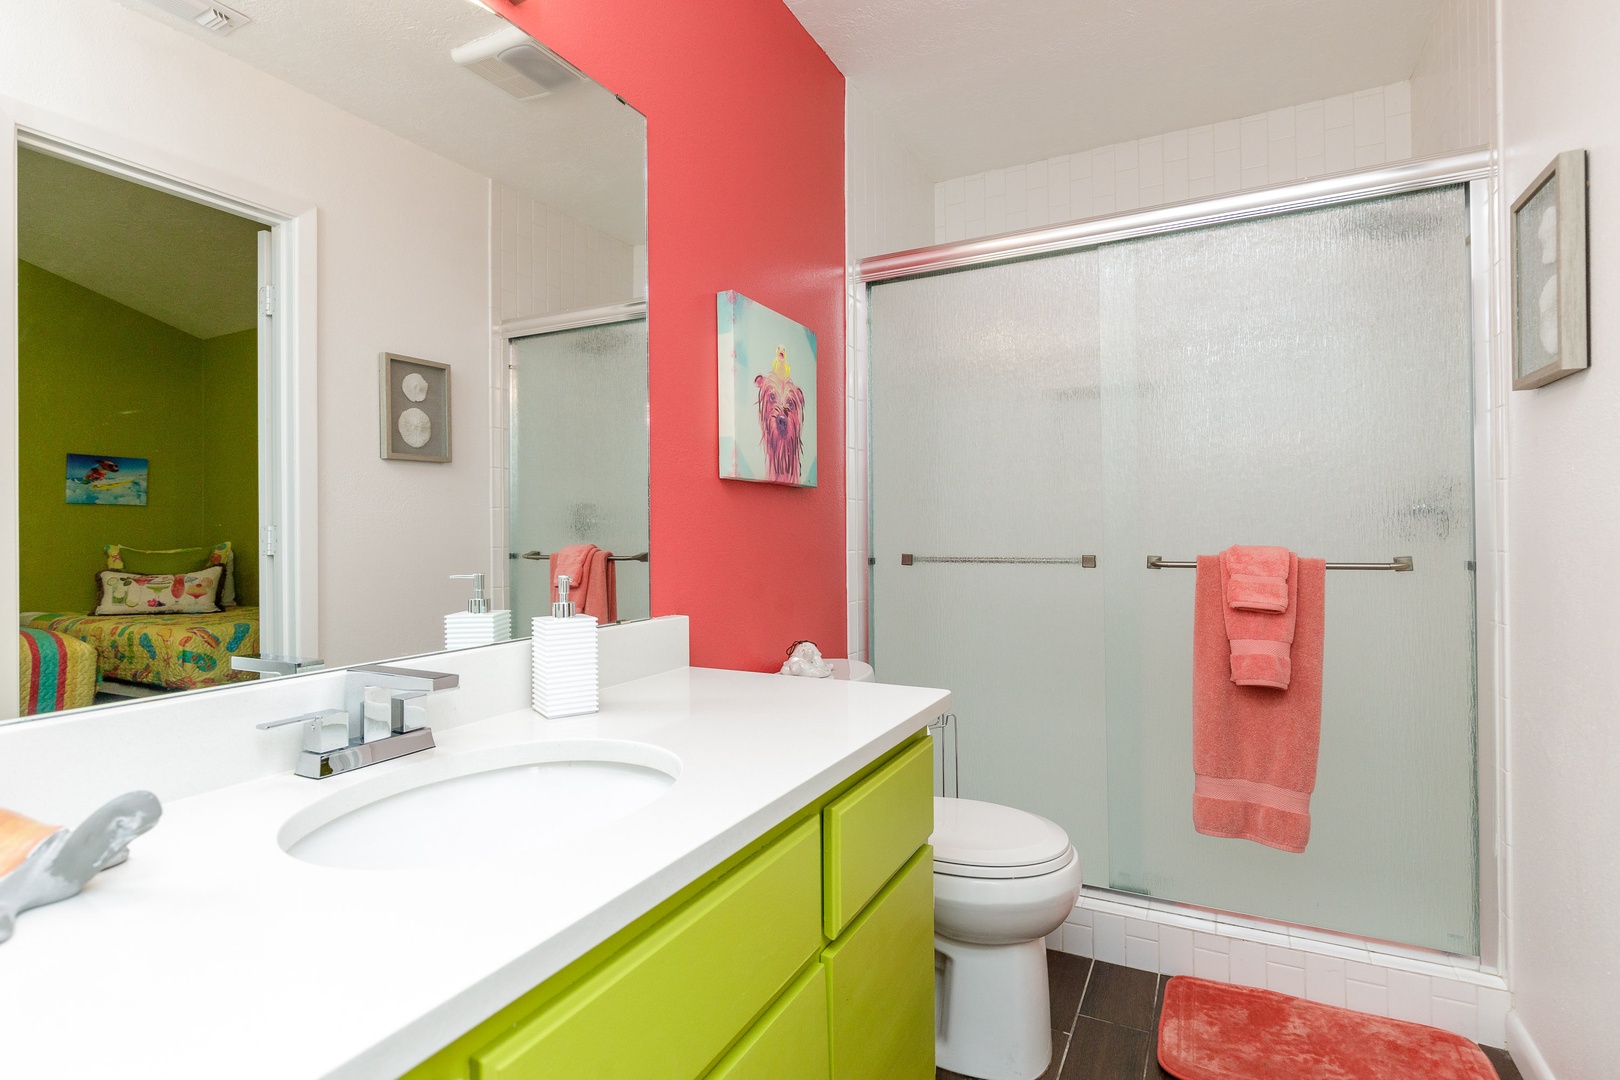 The queen en suite offers a colorful single vanity & glass shower